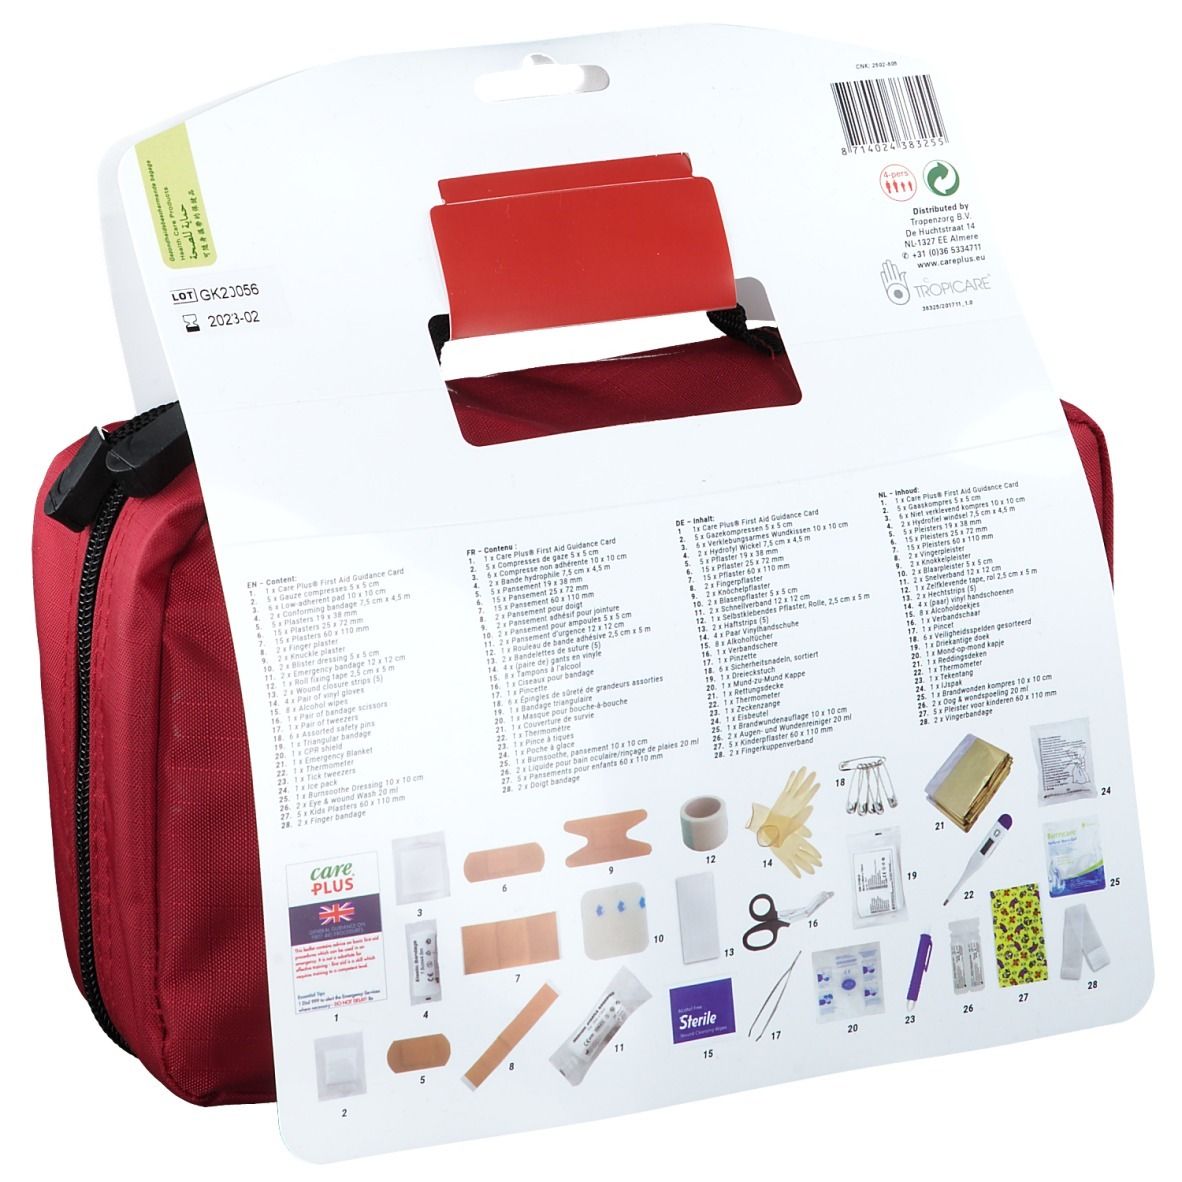 Care PLUS® First Aid Kit Family